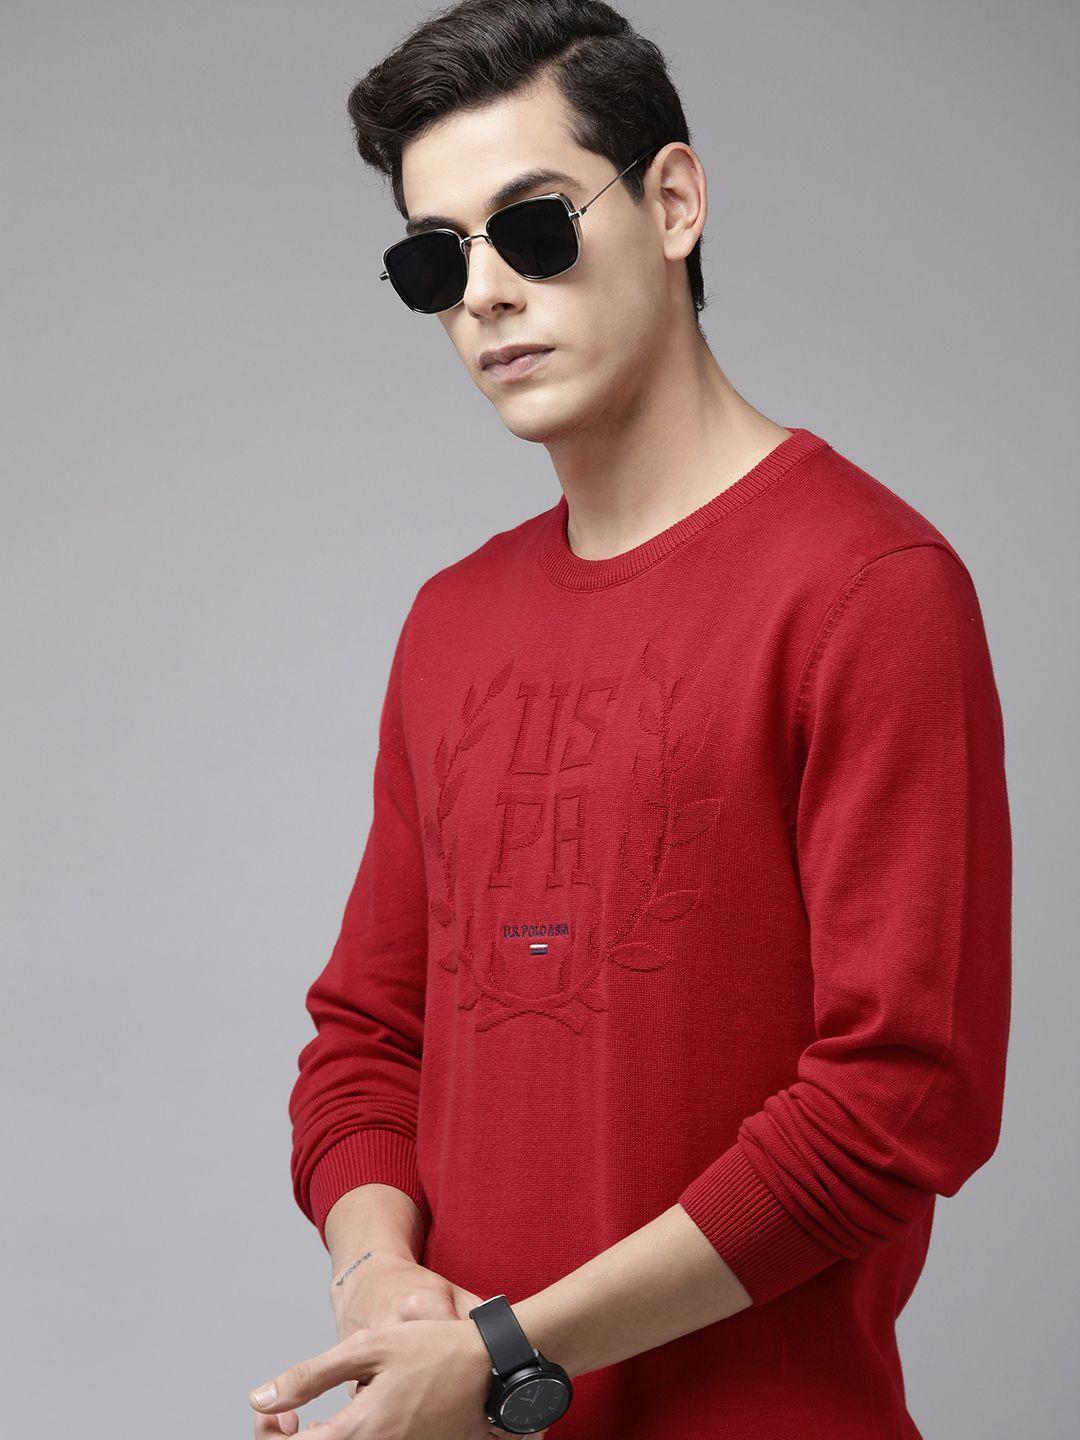 u.s. polo assn. men red printed pure cotton pullover